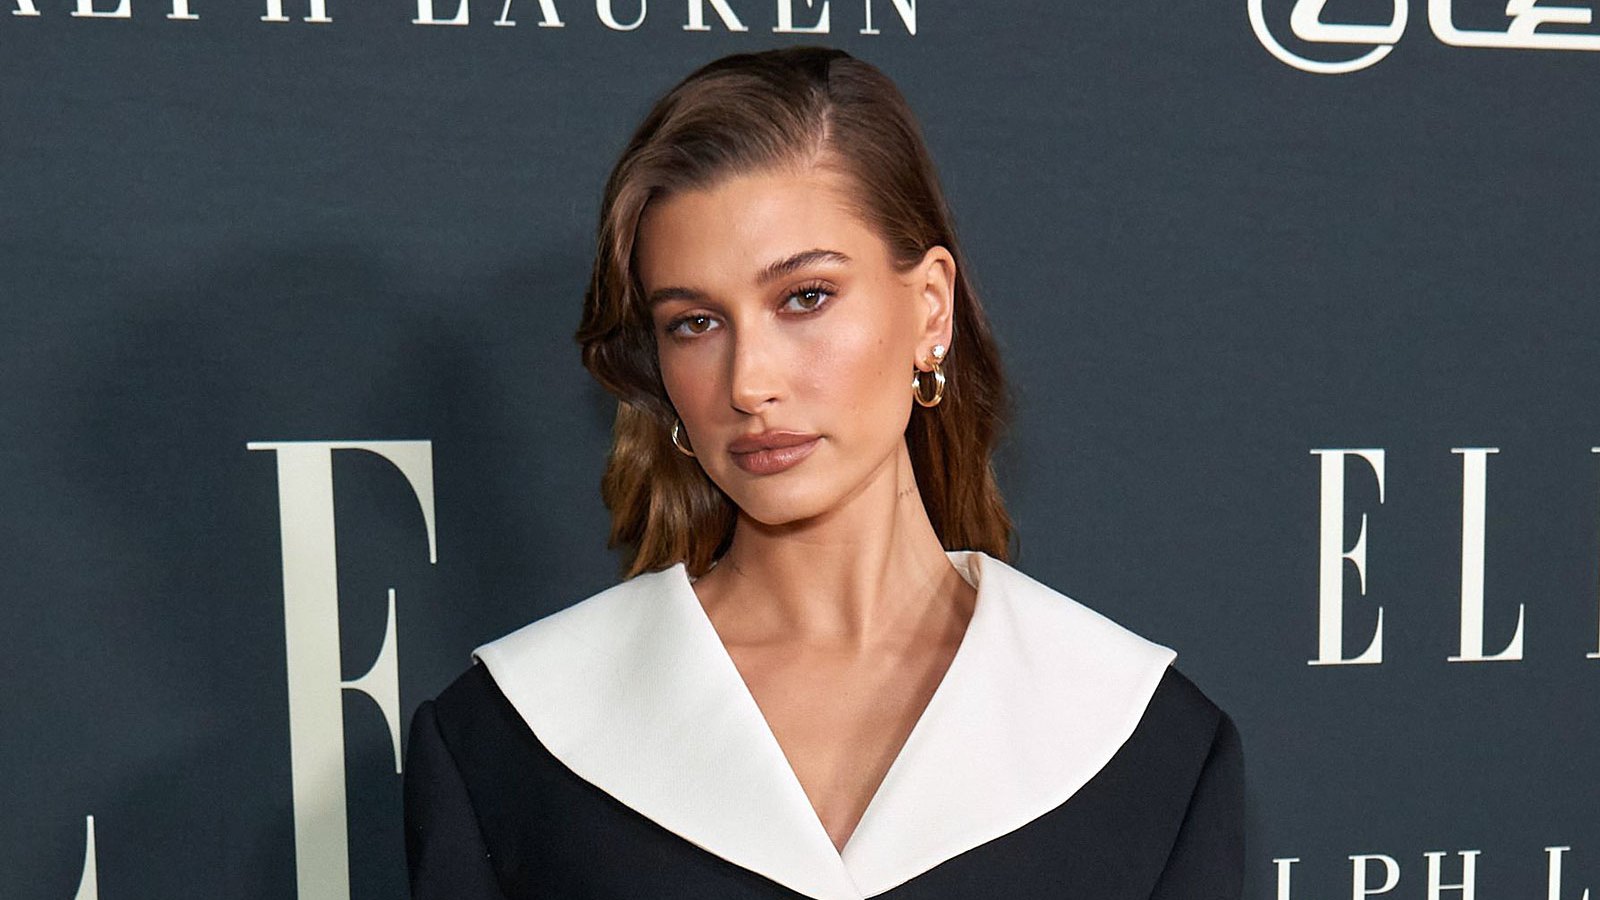 Hailey Bieber's Skincare Line Rhode Sued by Popular Clothing Brand With the Same Name